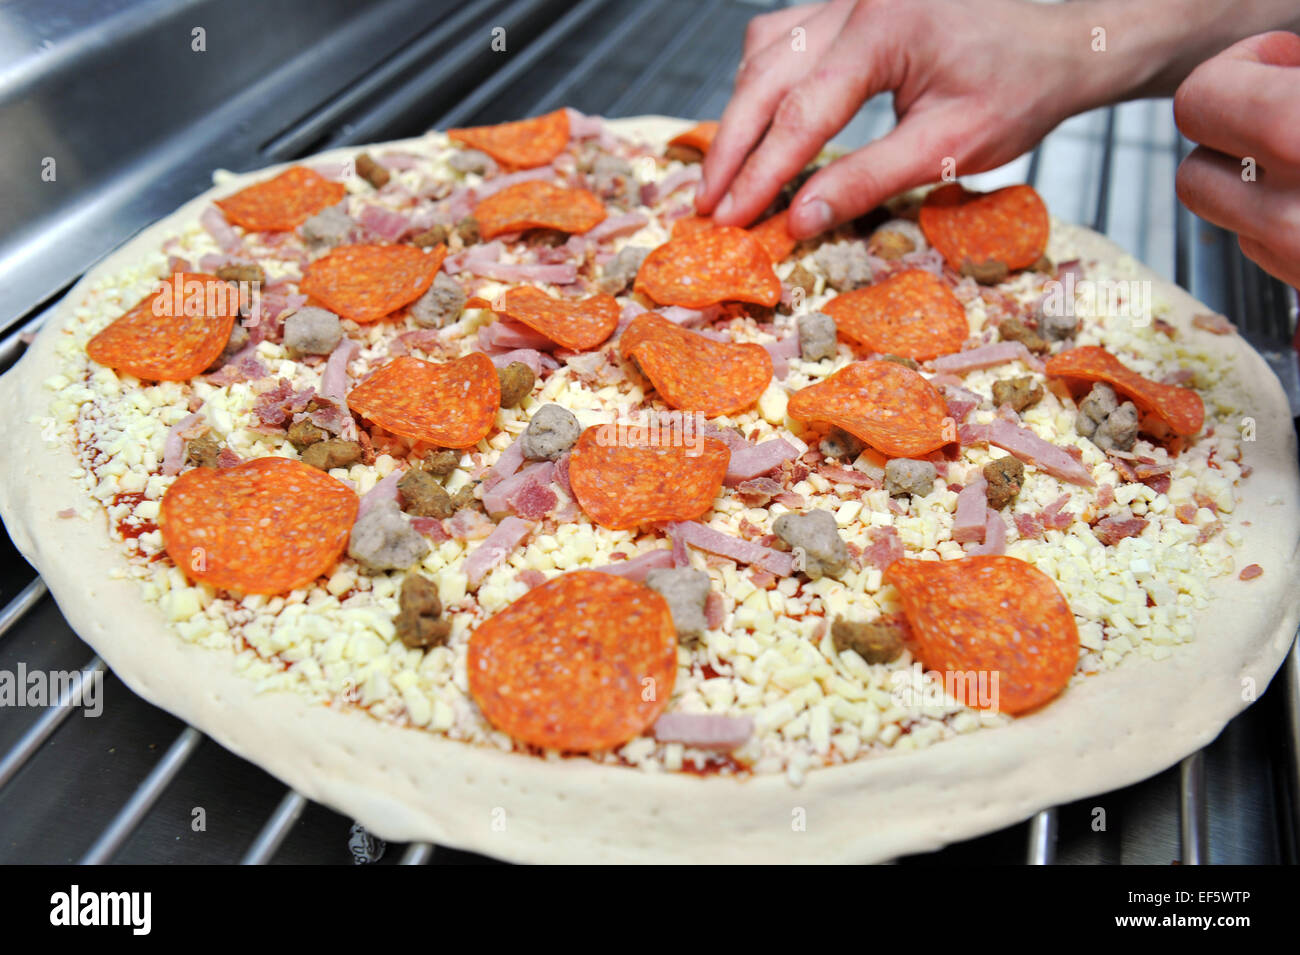 Close up making Pizzas in a takeaway, Leeds Stock Photo